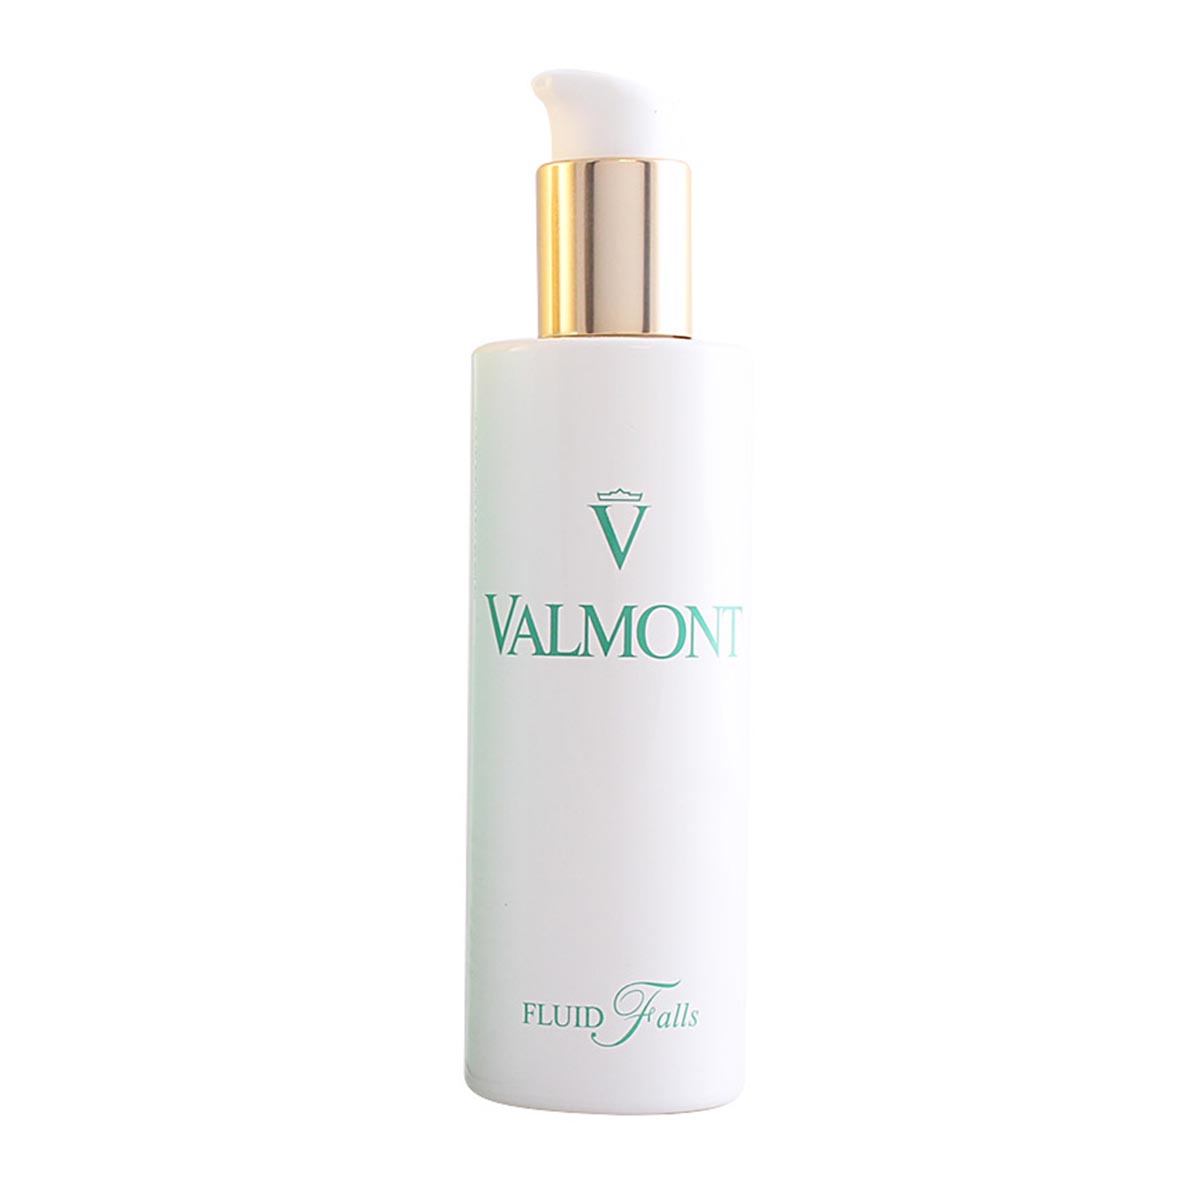 Fluid Falls Purity Valmont Fluid Cream Makeup Remover 150ml - Distripoint